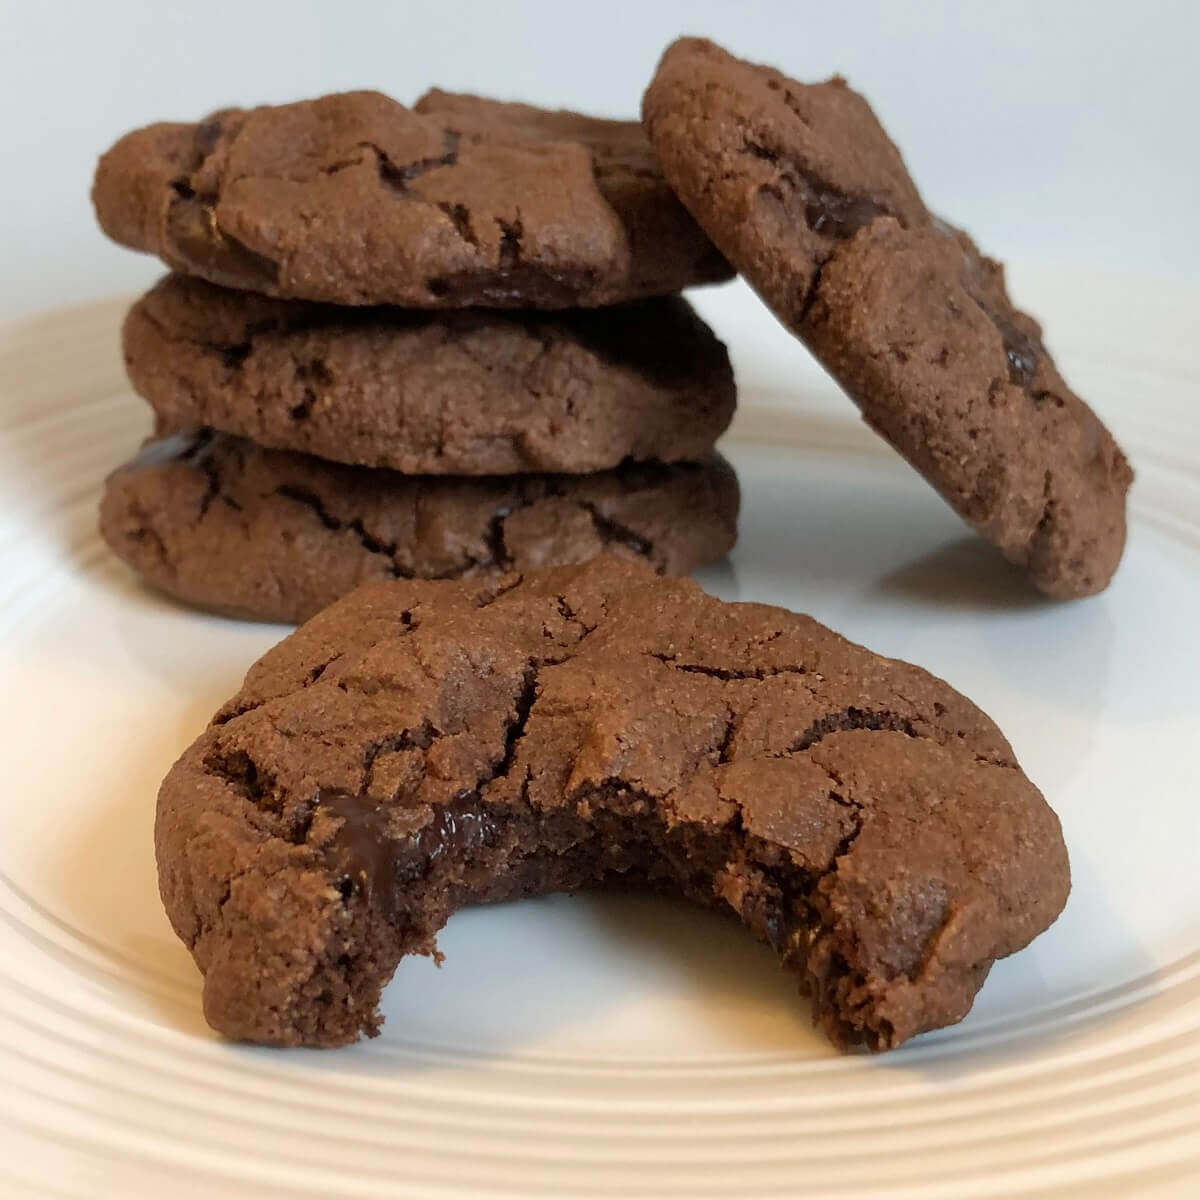 Chocolaty paleo cookies on a white plate.